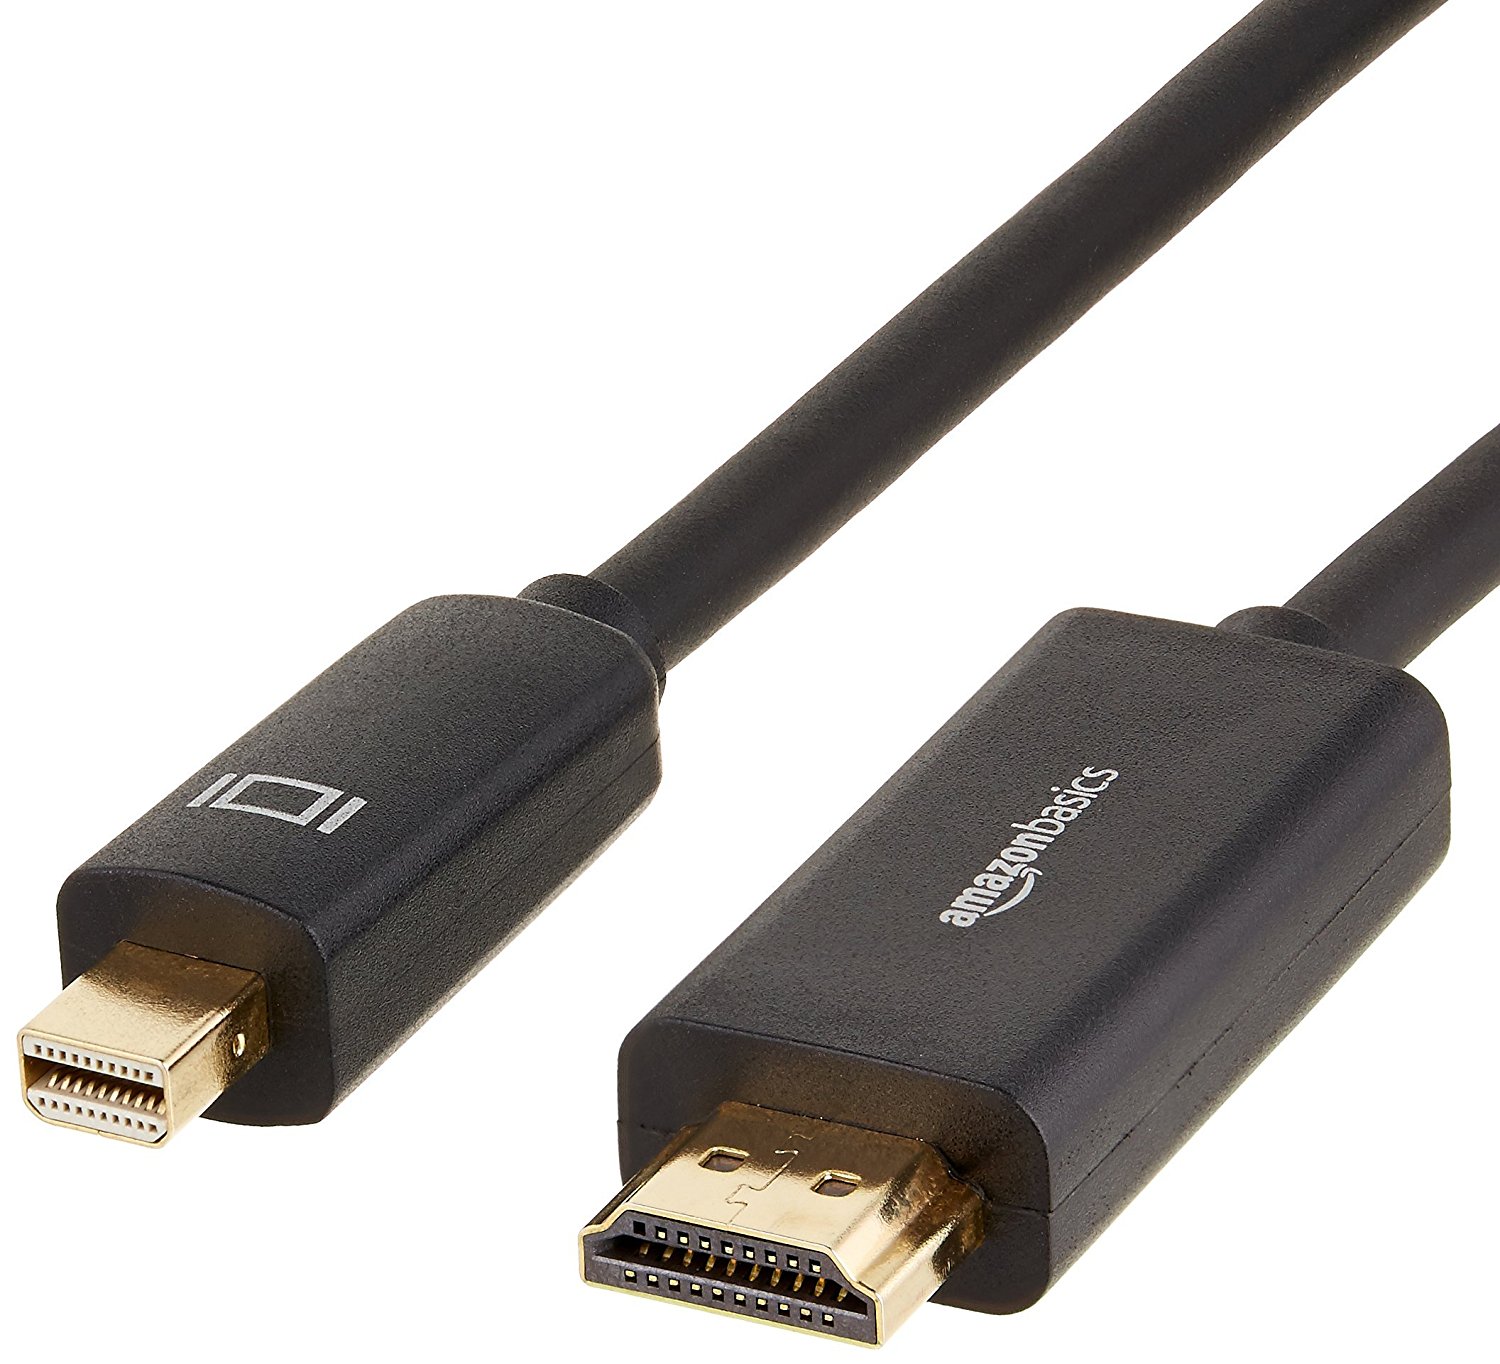 hdmi to thunderbolt 2 cable